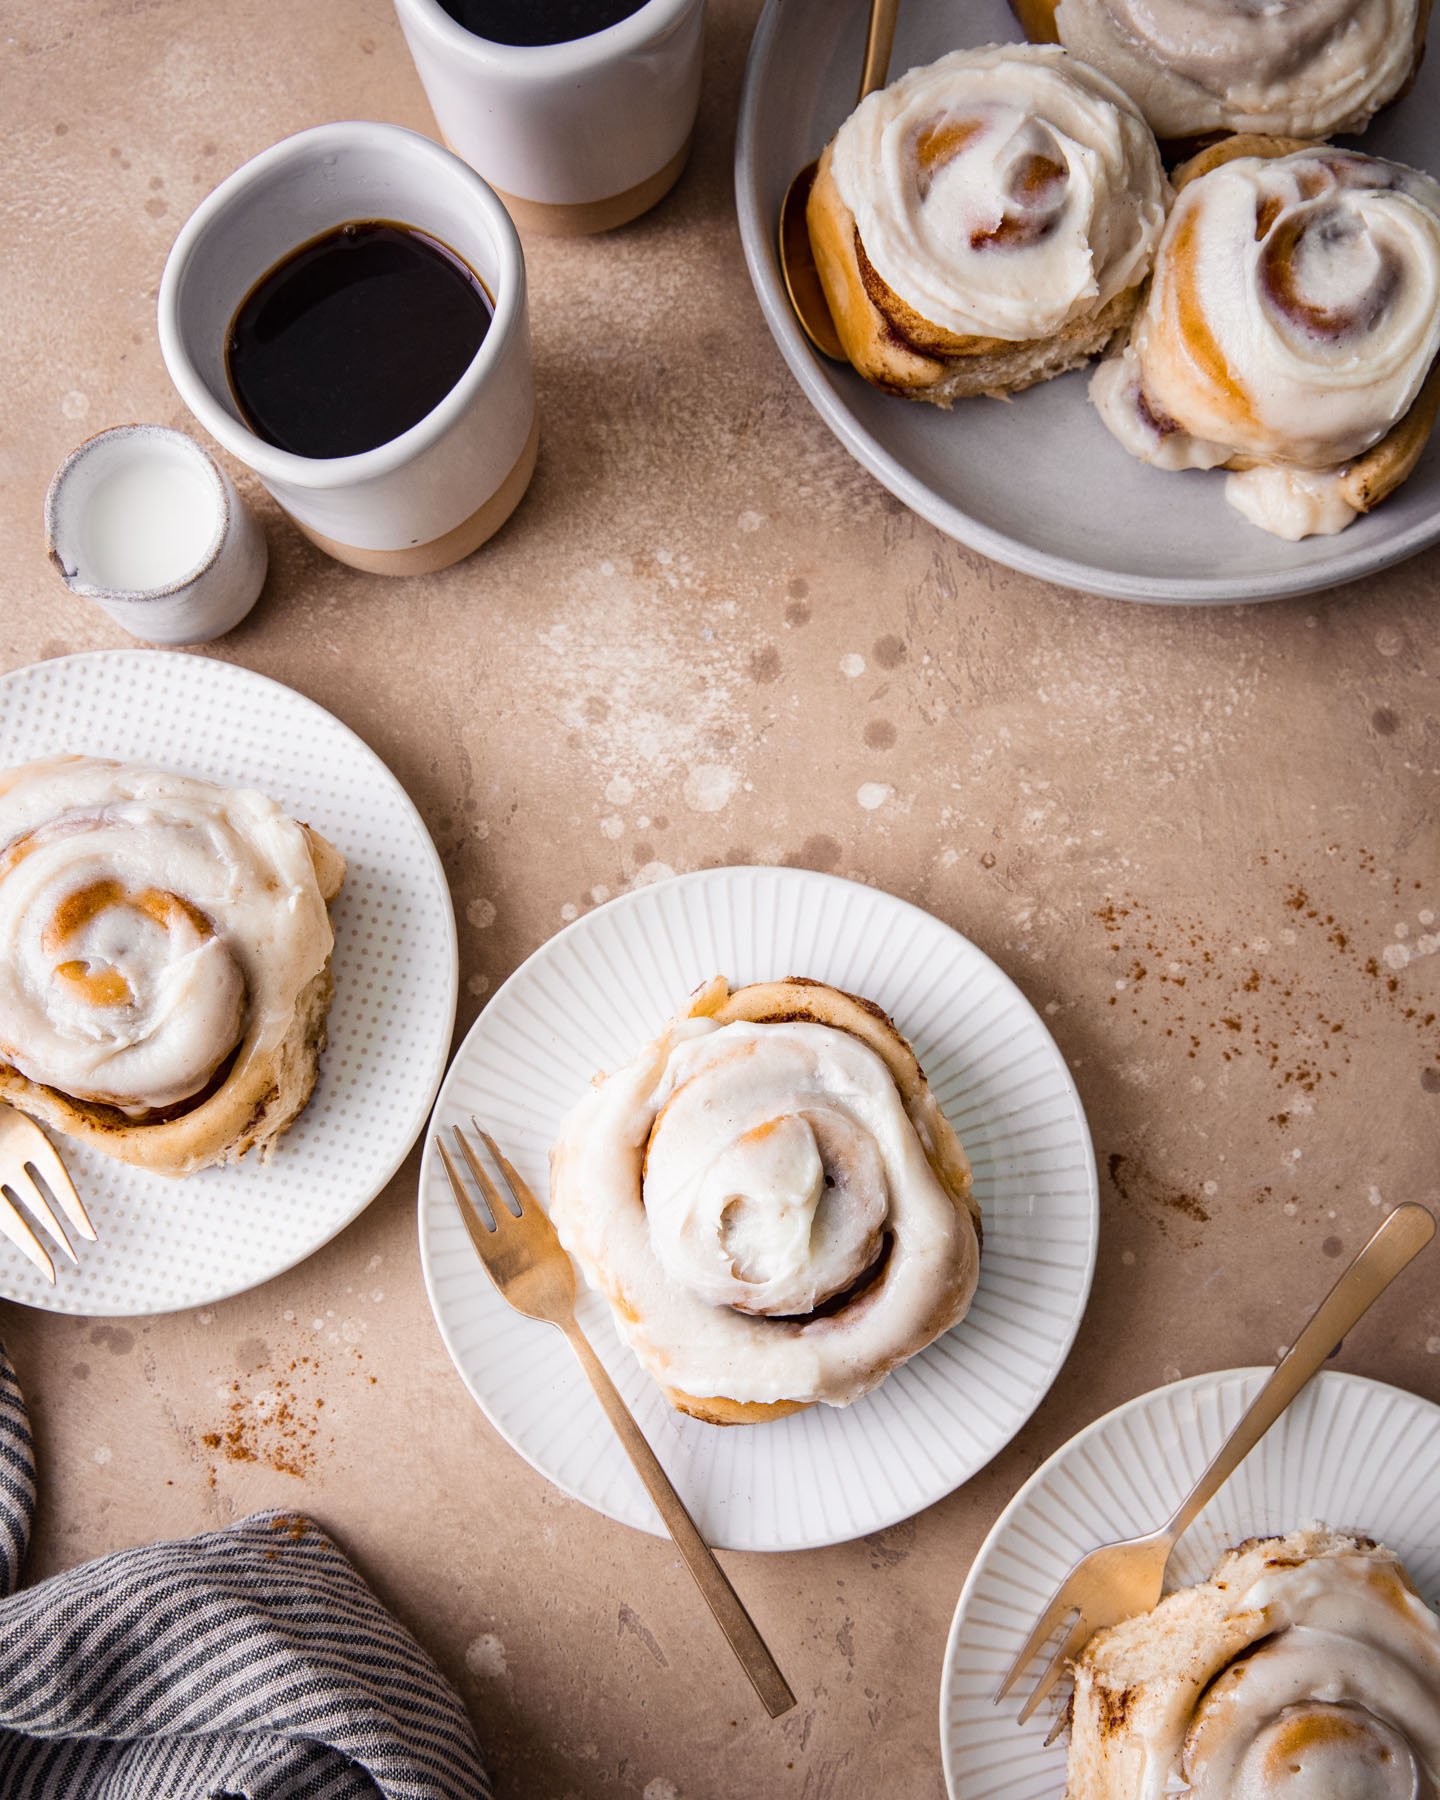 Classic cinnamon rolls with cream cheese frosting